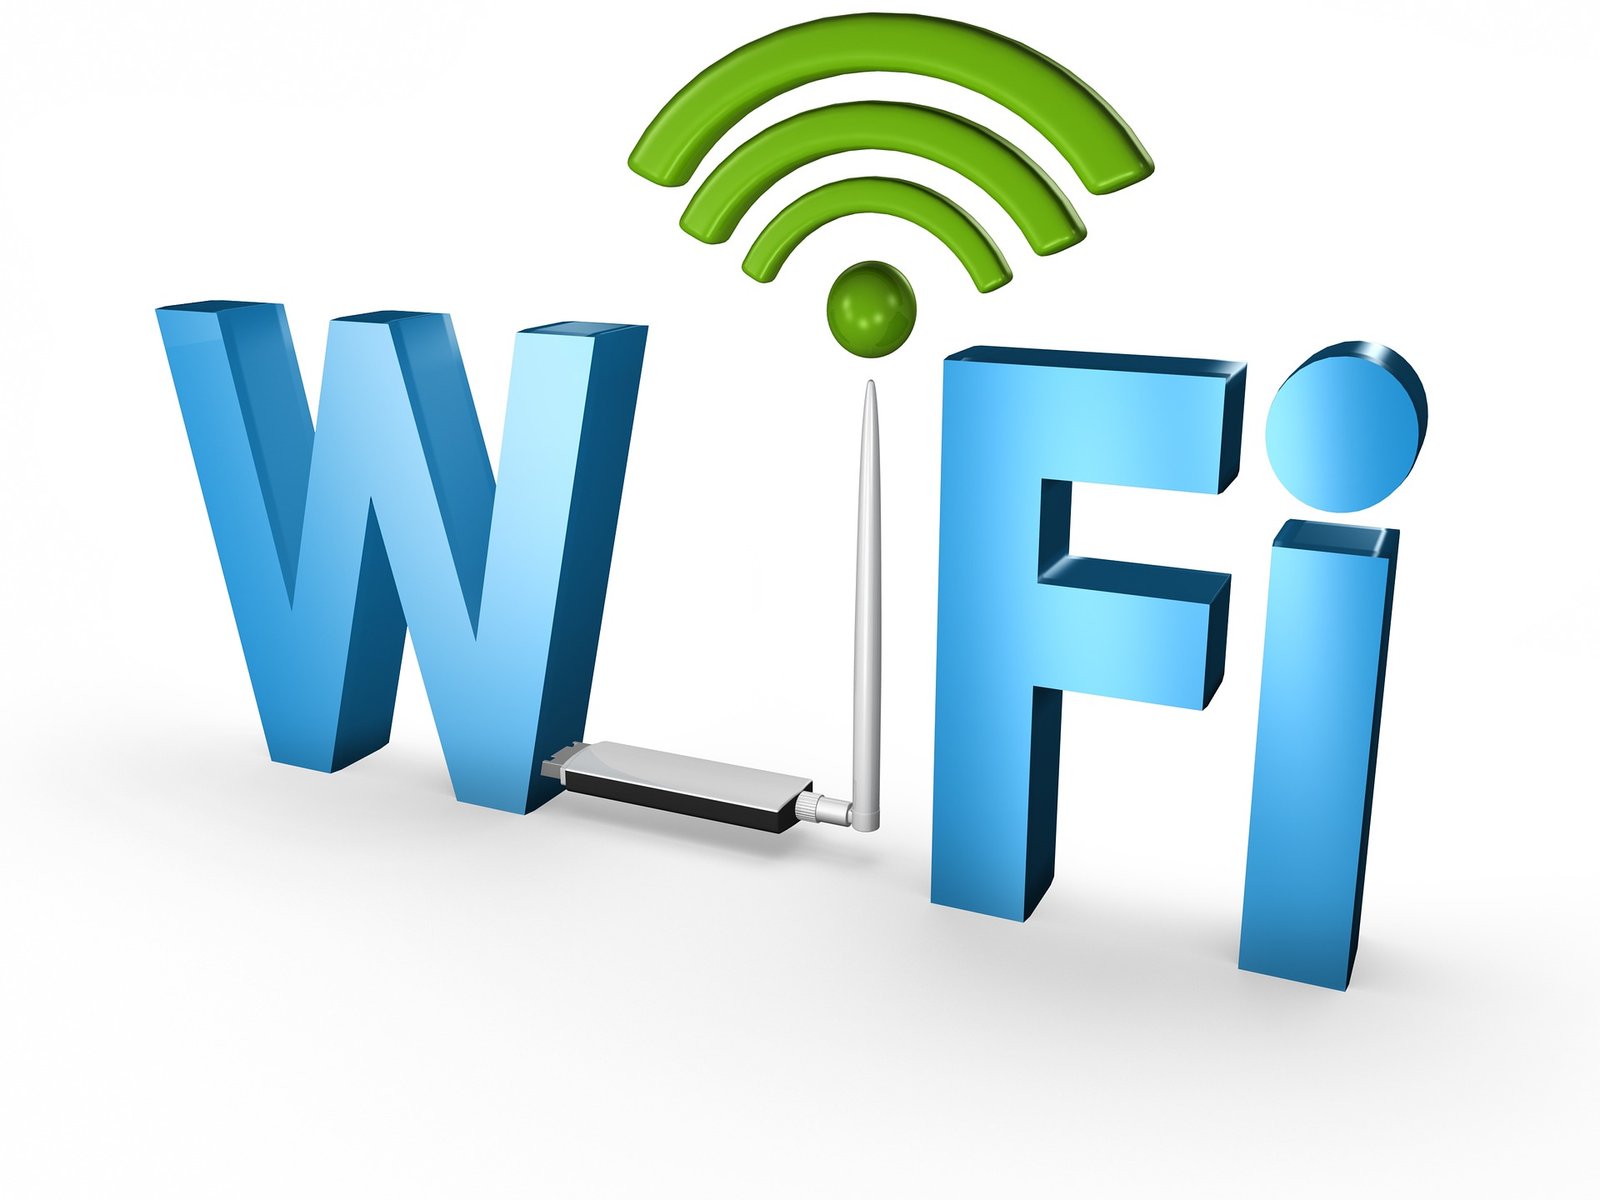 Top 5 Tips to Improve Your Wi-Fi Range and Performance